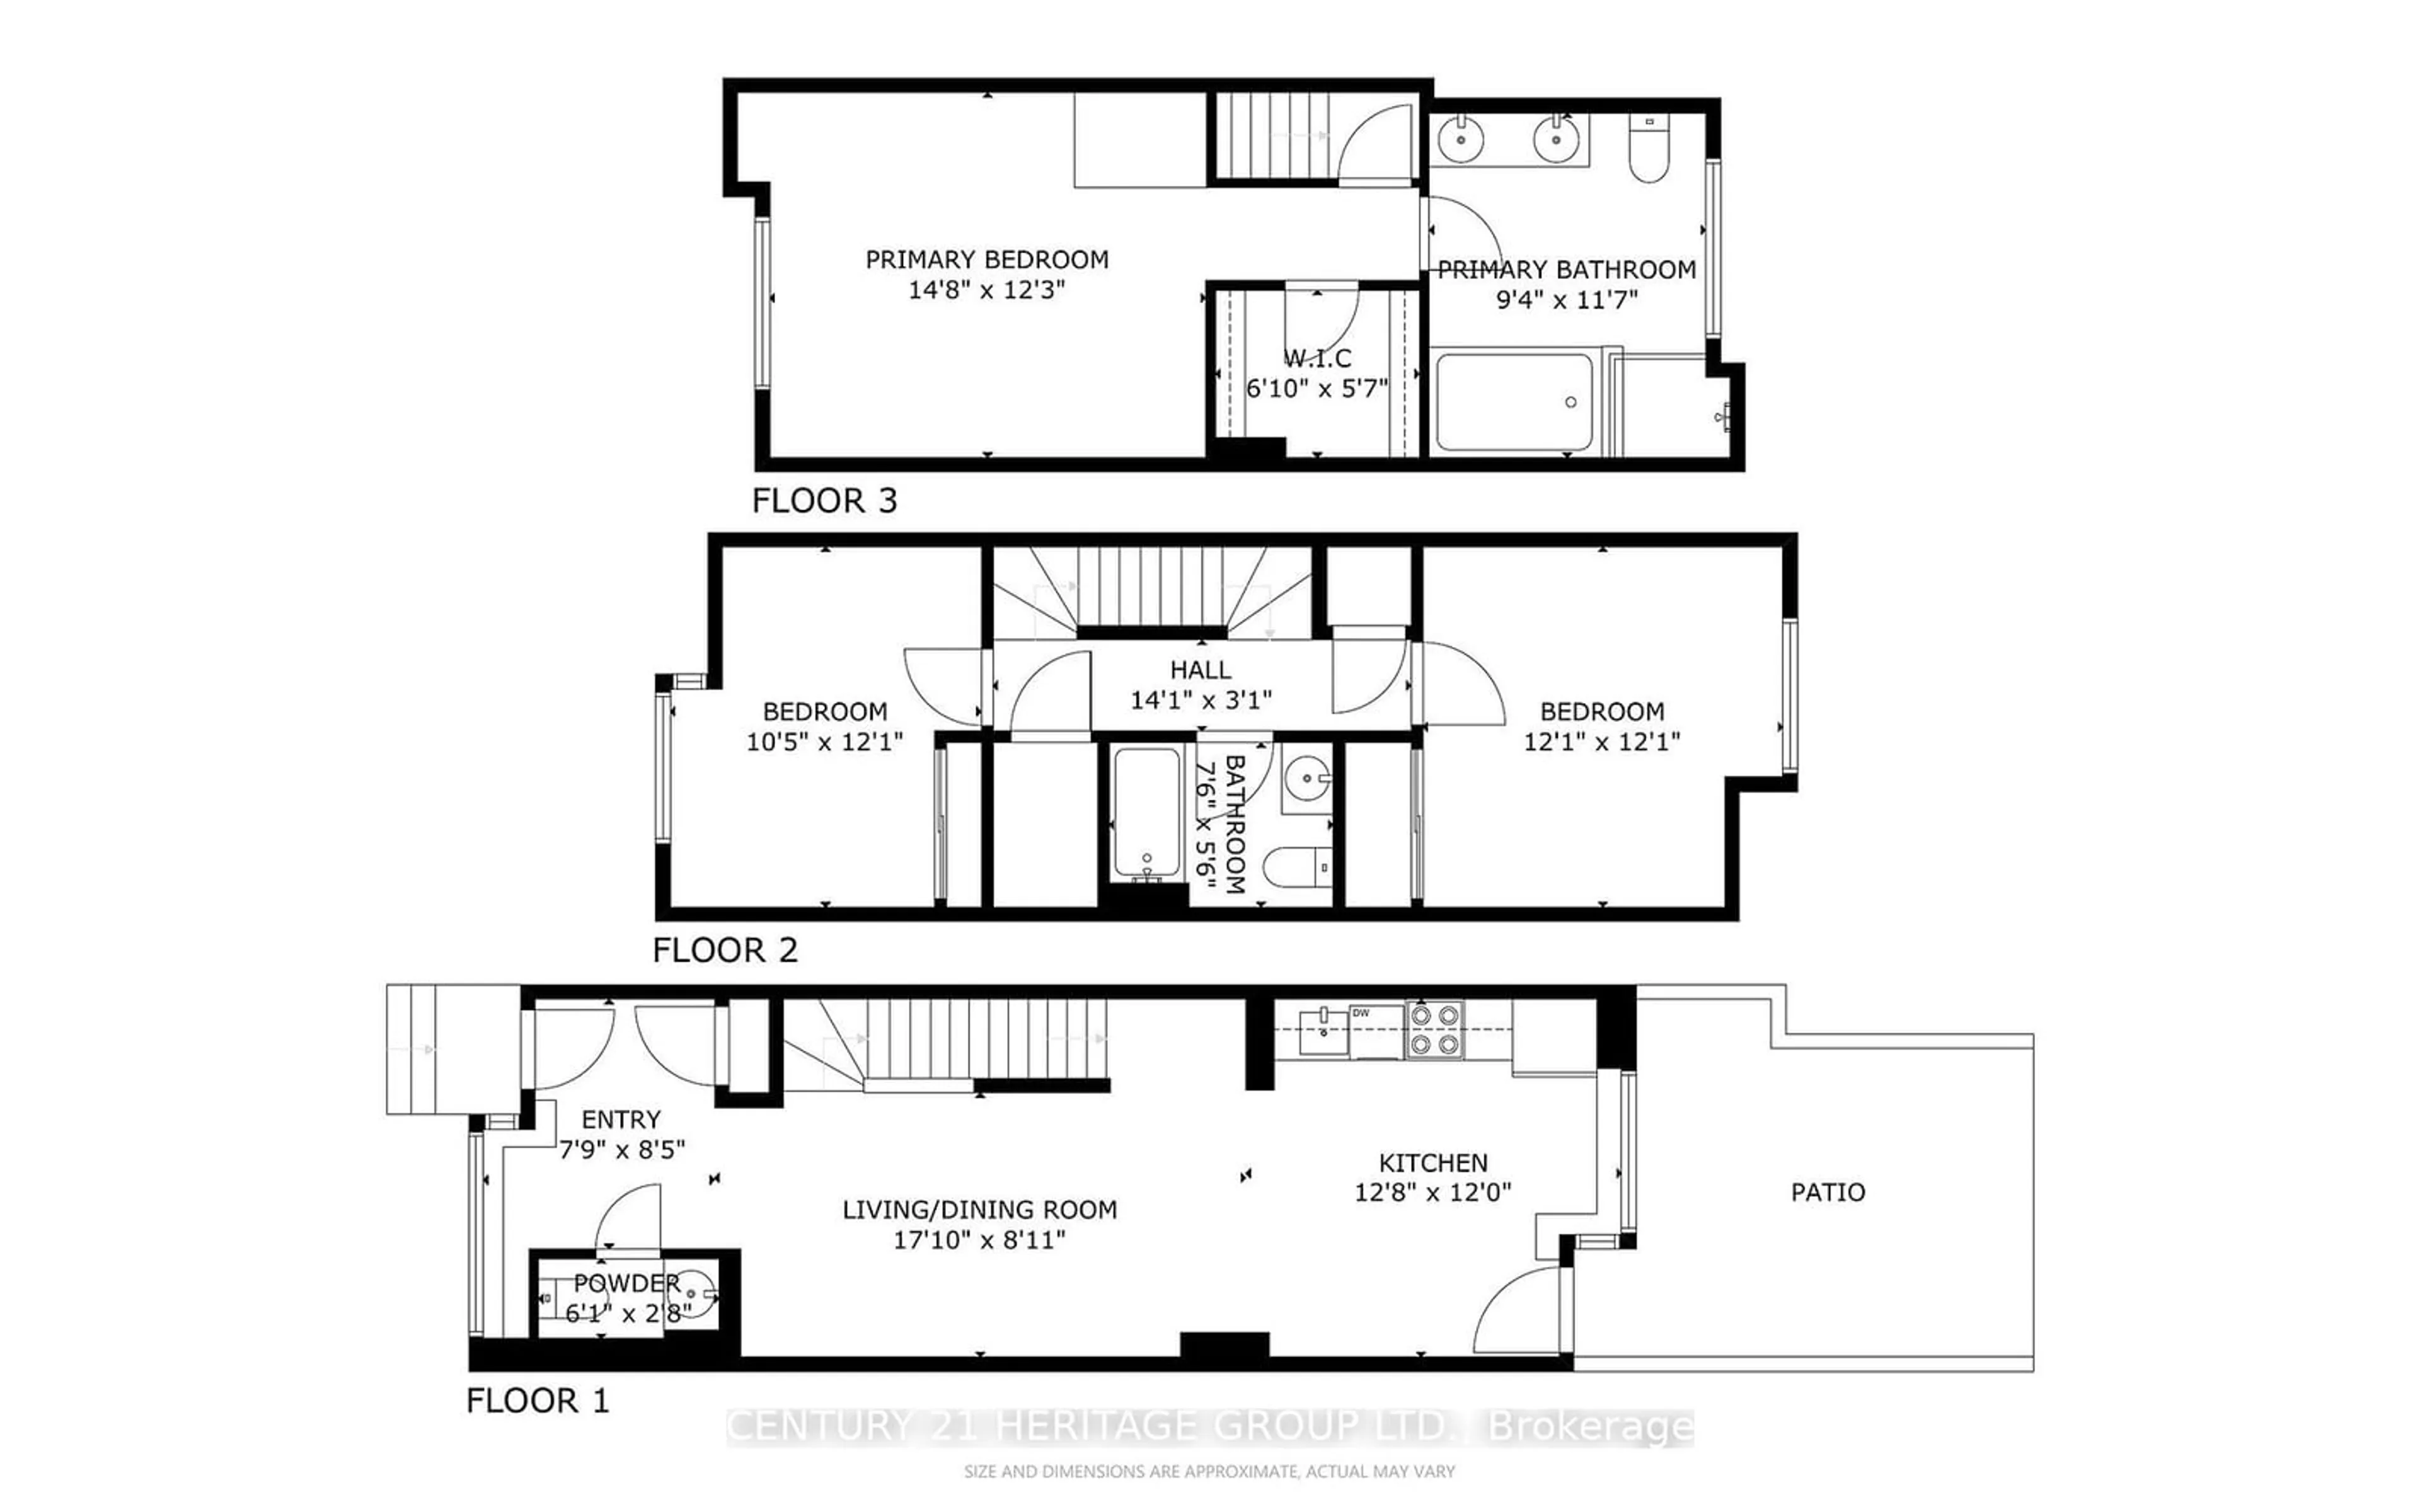 Floor plan for 23 Sheppard Ave #TH10, Toronto Ontario M2N 0C8